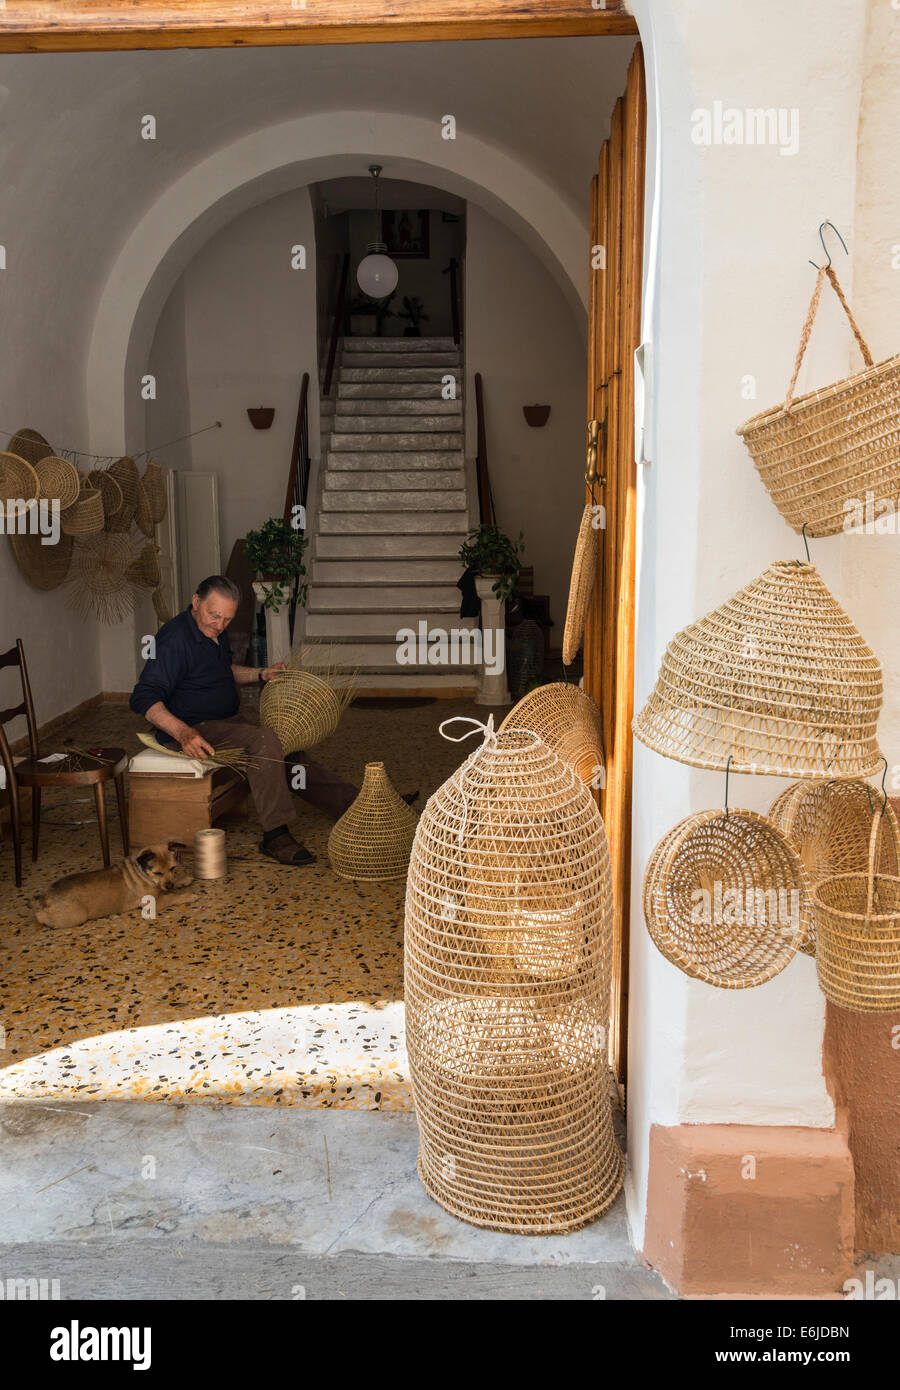 Fishing traps known as 'Nasse' and baskets being made in Gallipoli old town, Puglia, Italy. Stock Photo